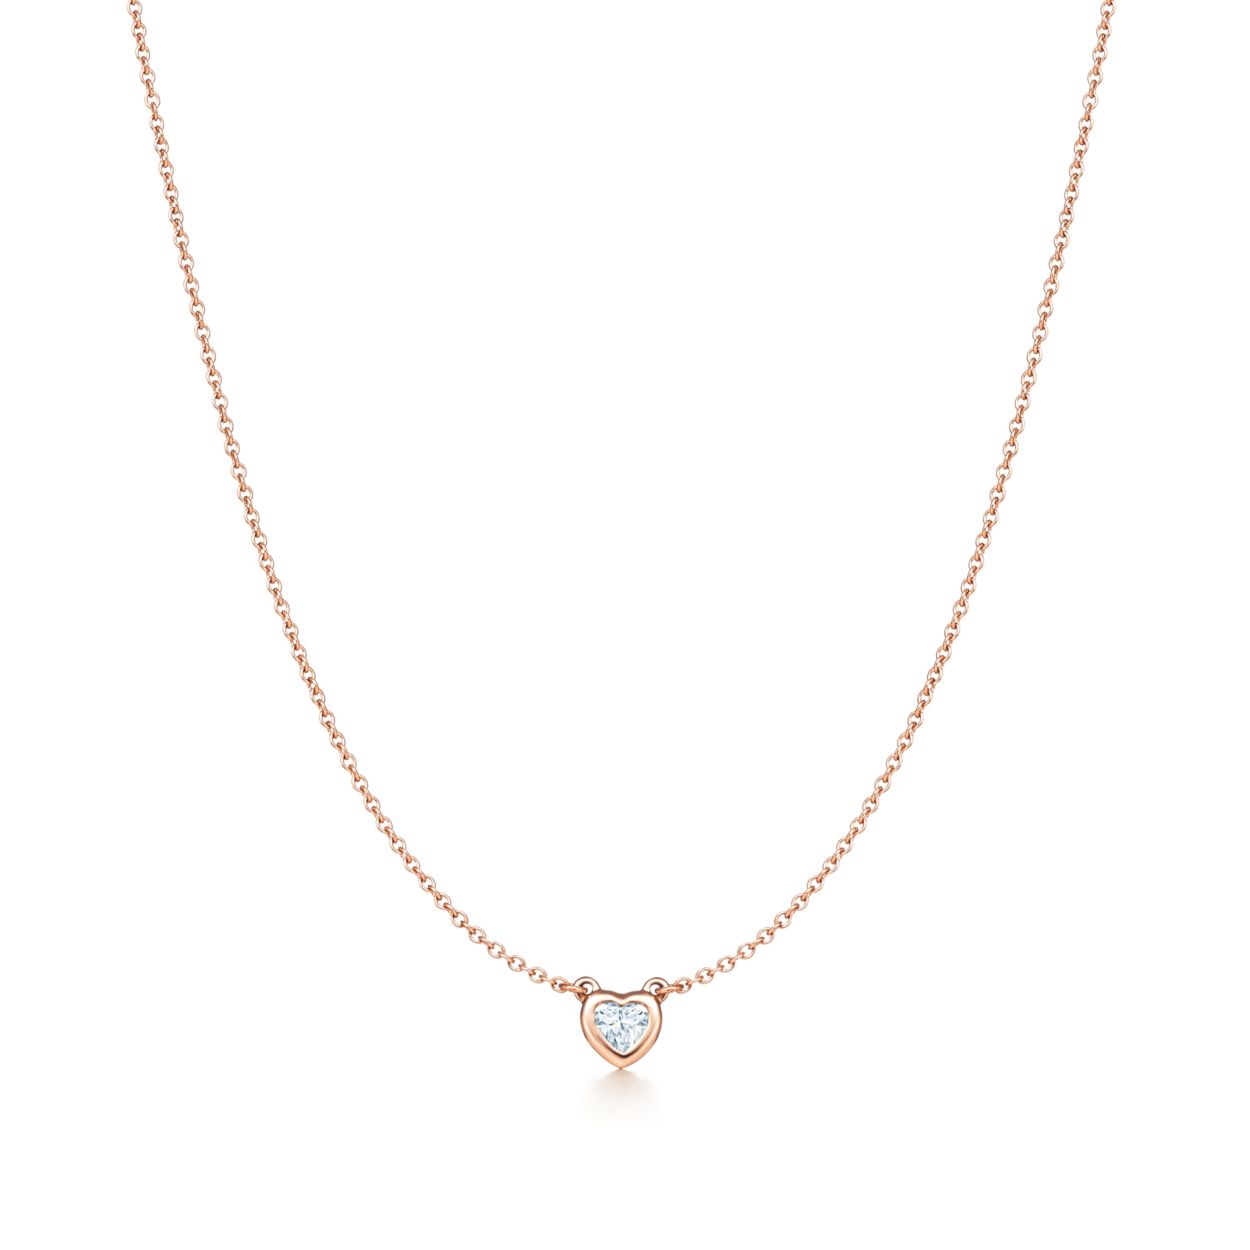 Elsa Peretti Diamonds By The Yard Heart Necklace In 18k Rose Gold